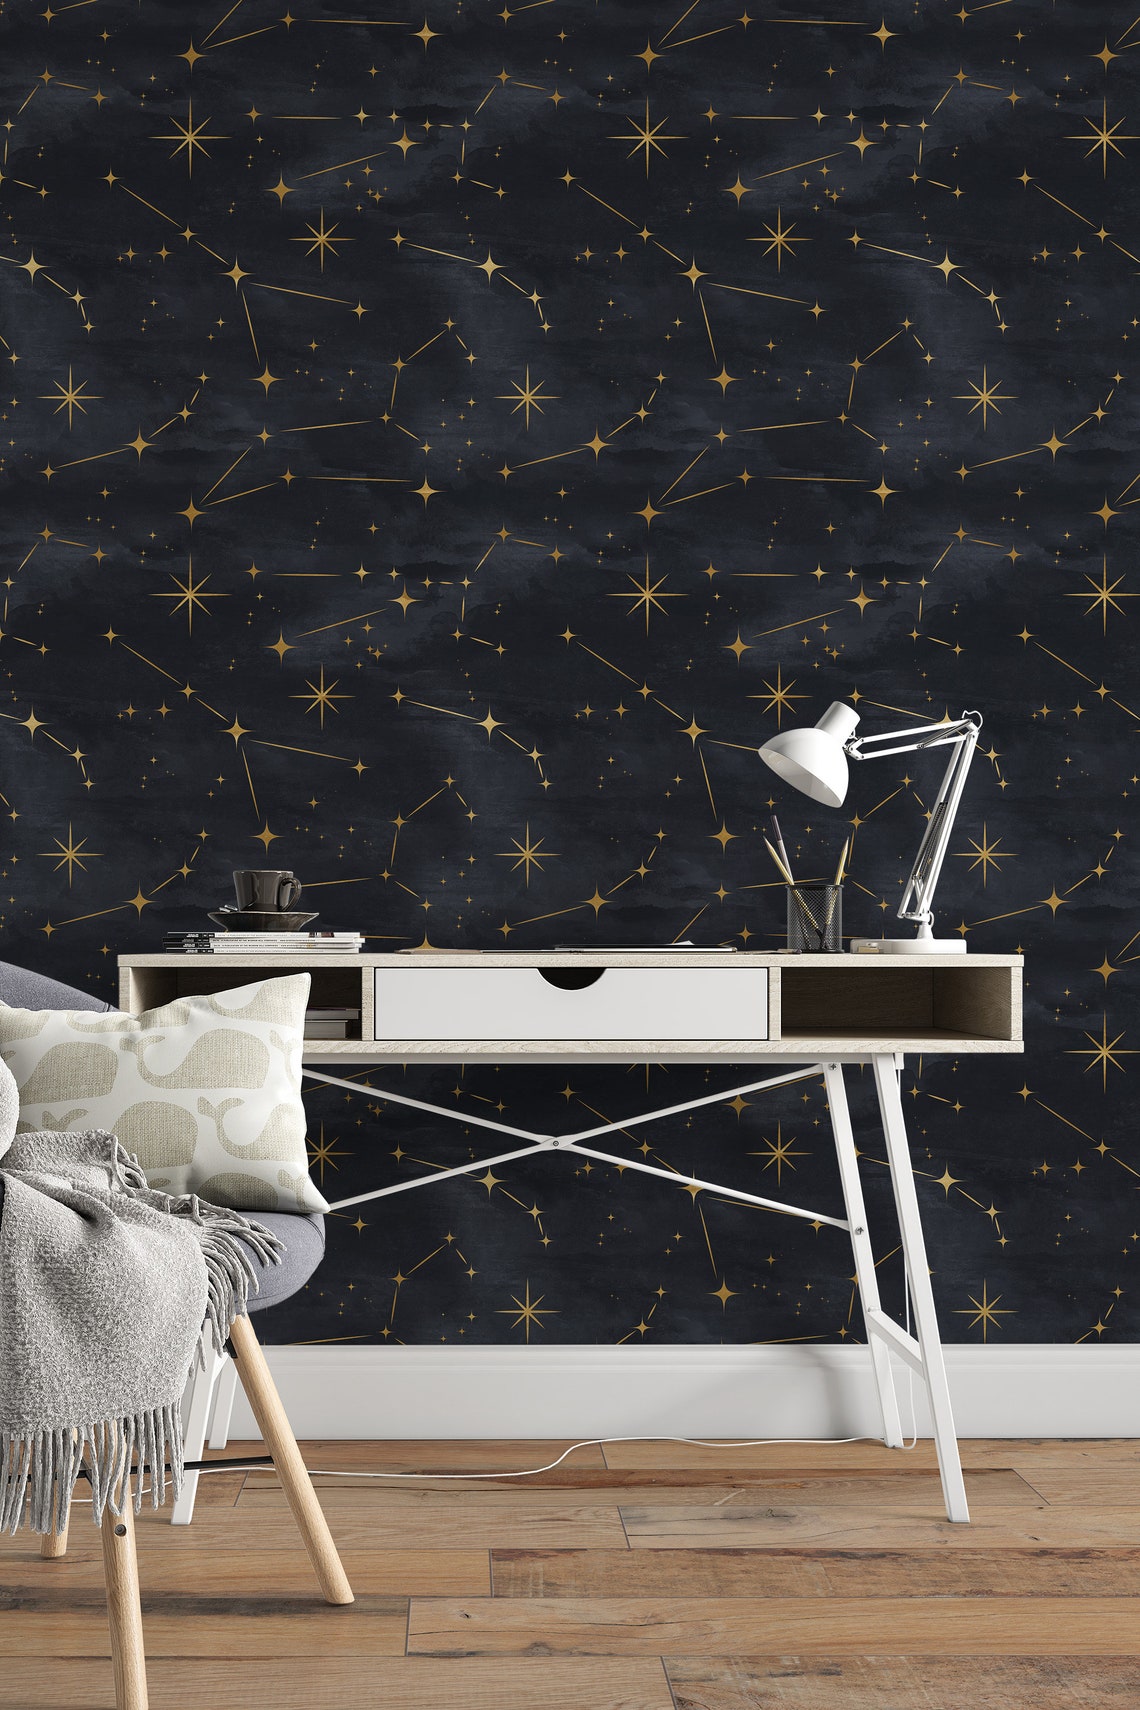 Constellation and Starry Night Space Removable Peel & Stick - Etsy